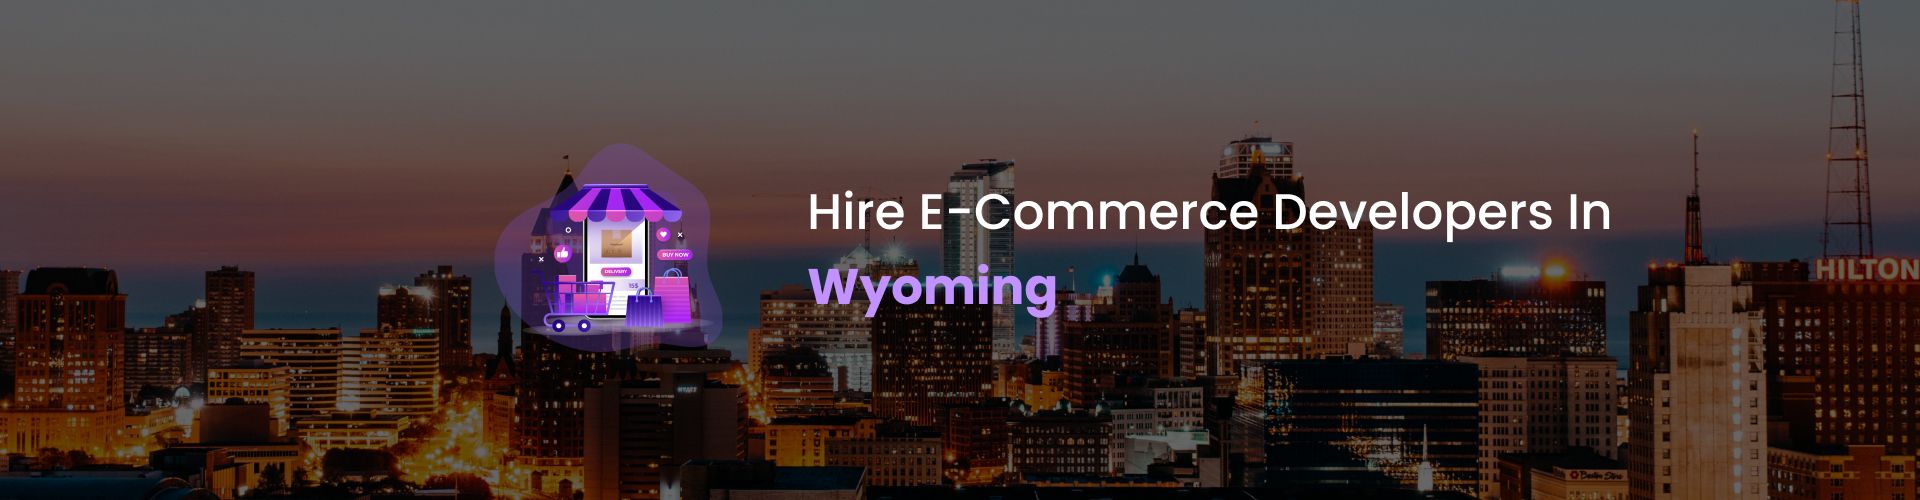 hire ecommerce developers in wyoming